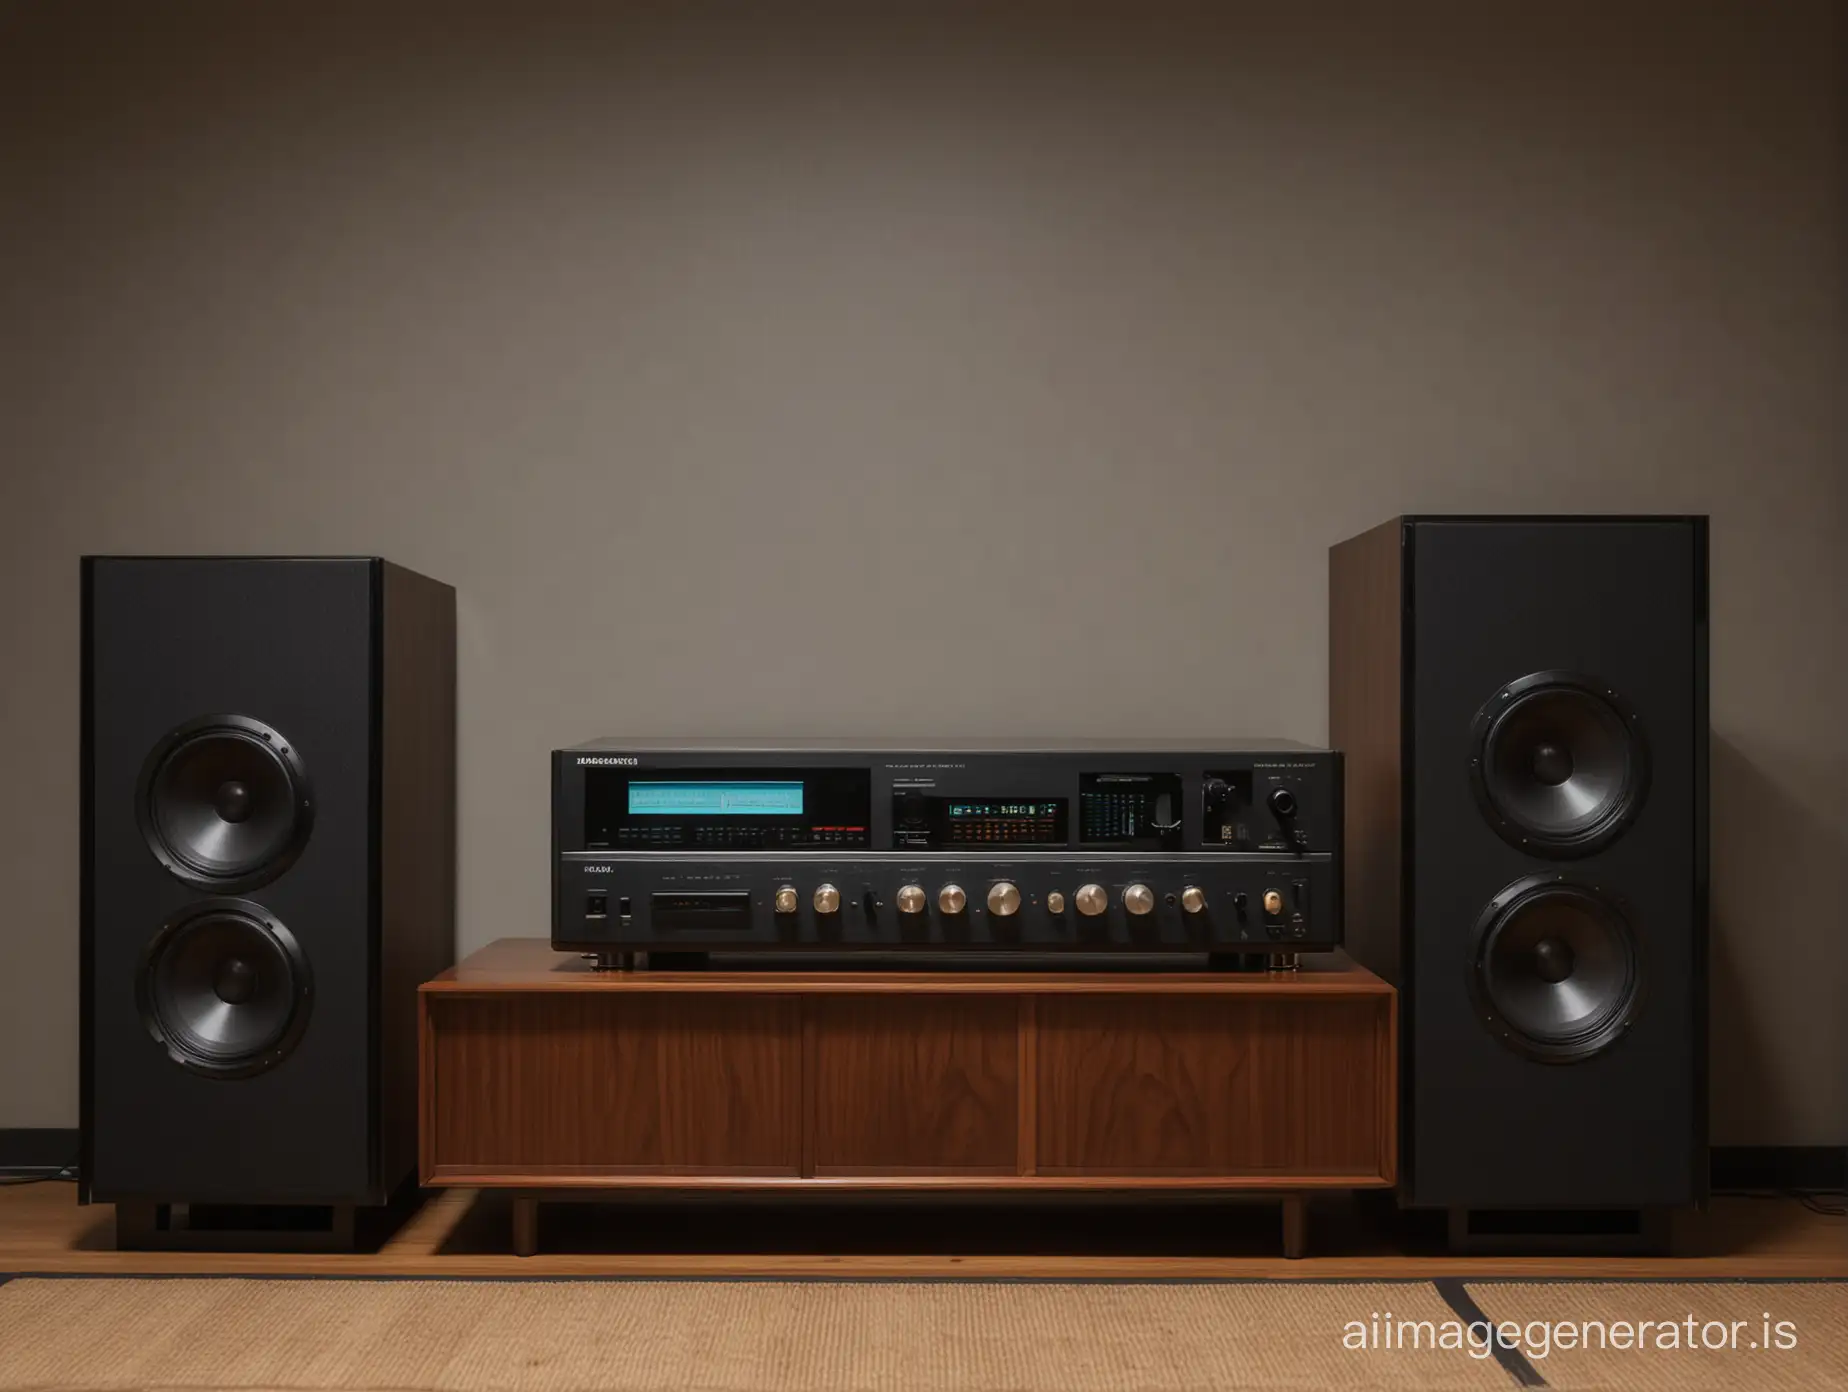 A 70's japanese stereo system with 2 seperate loudspeakers in a dark room with display
front view
